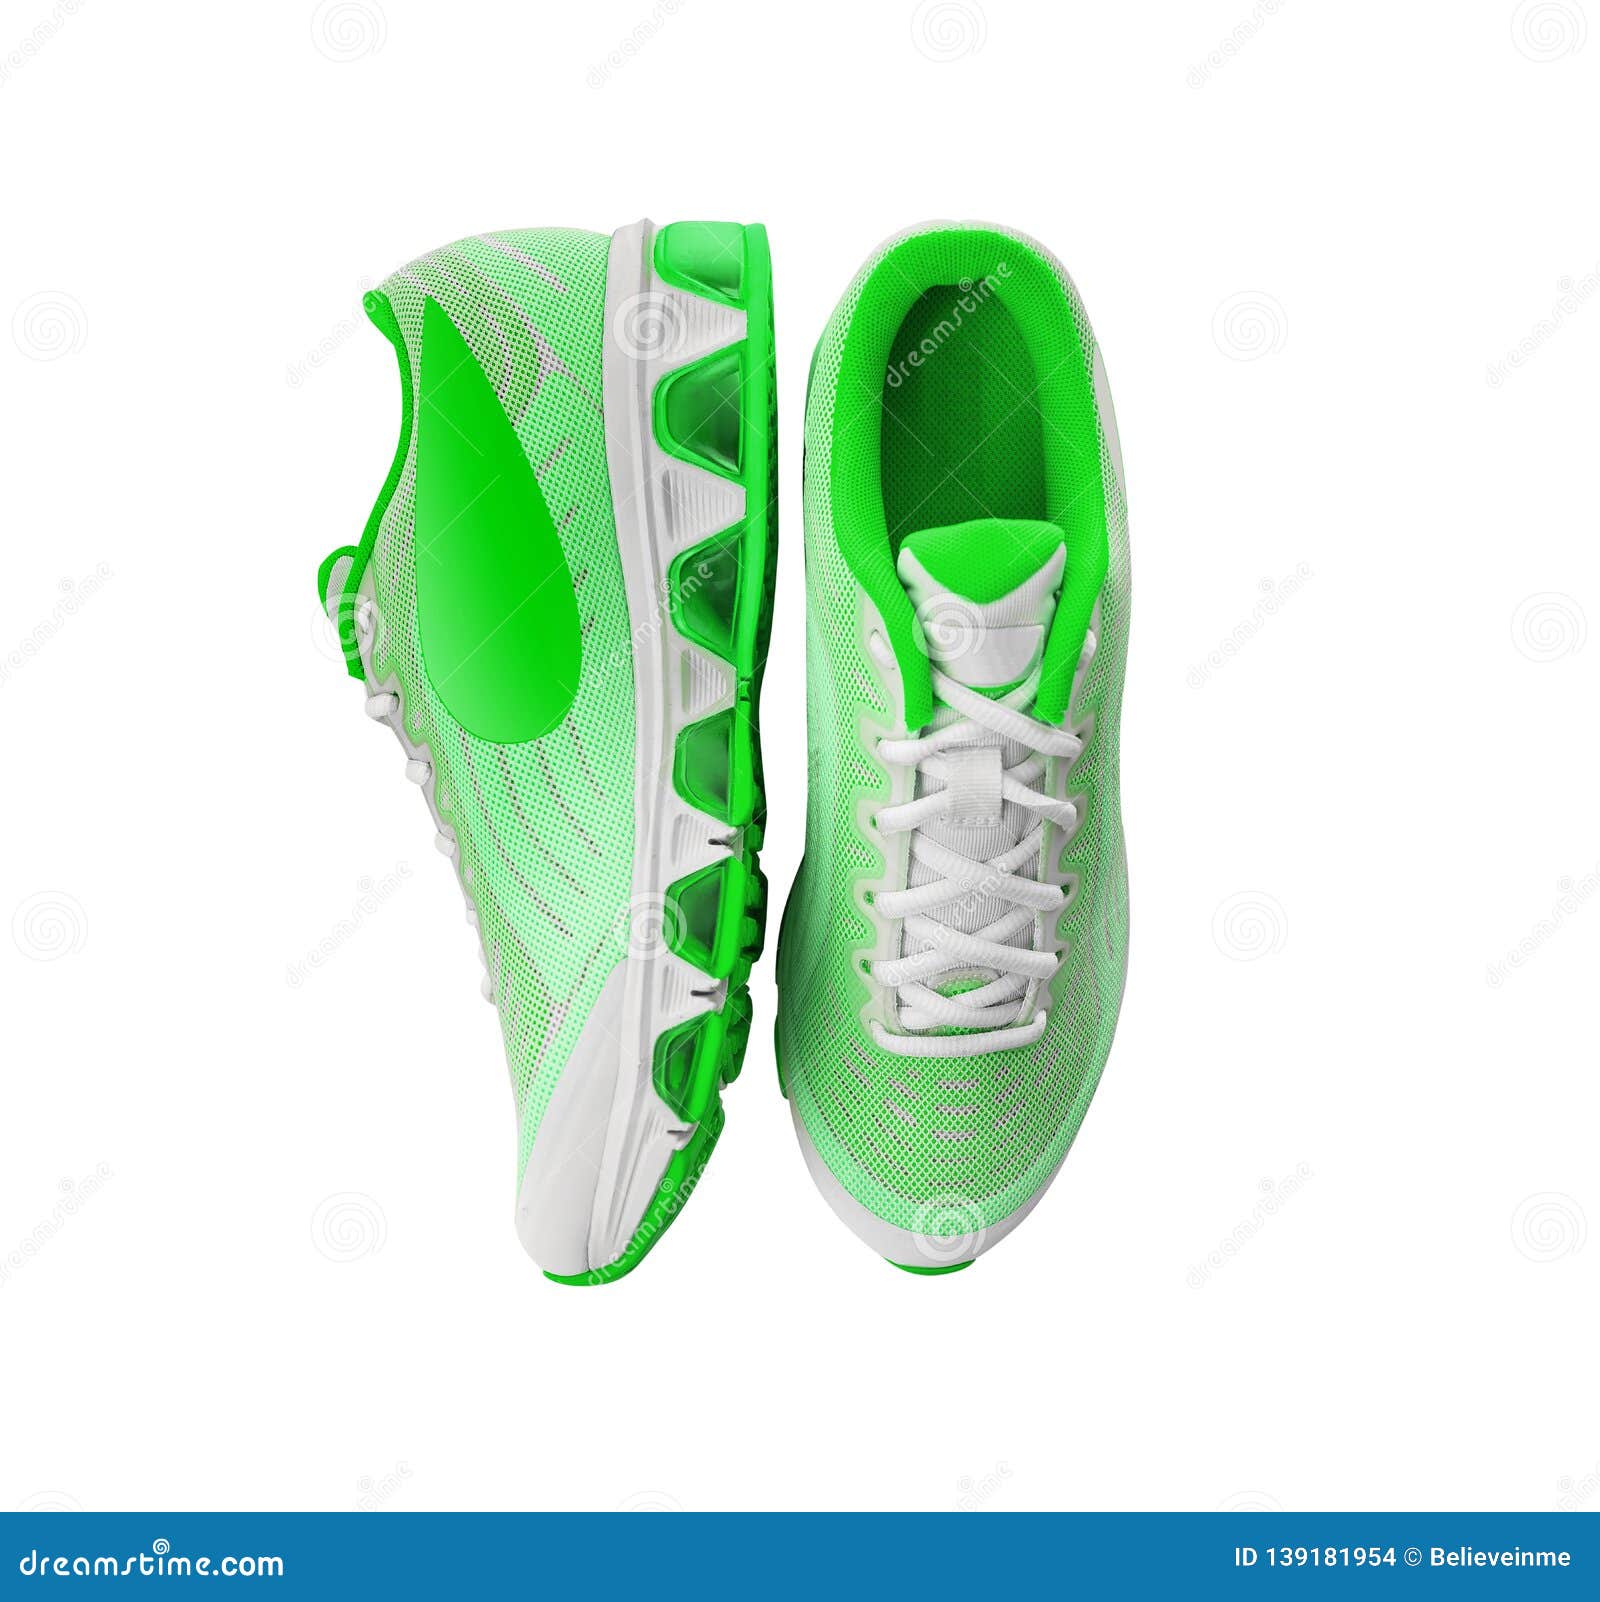 Lime or green sneakers. stock photo. Image of jogging - 139181954